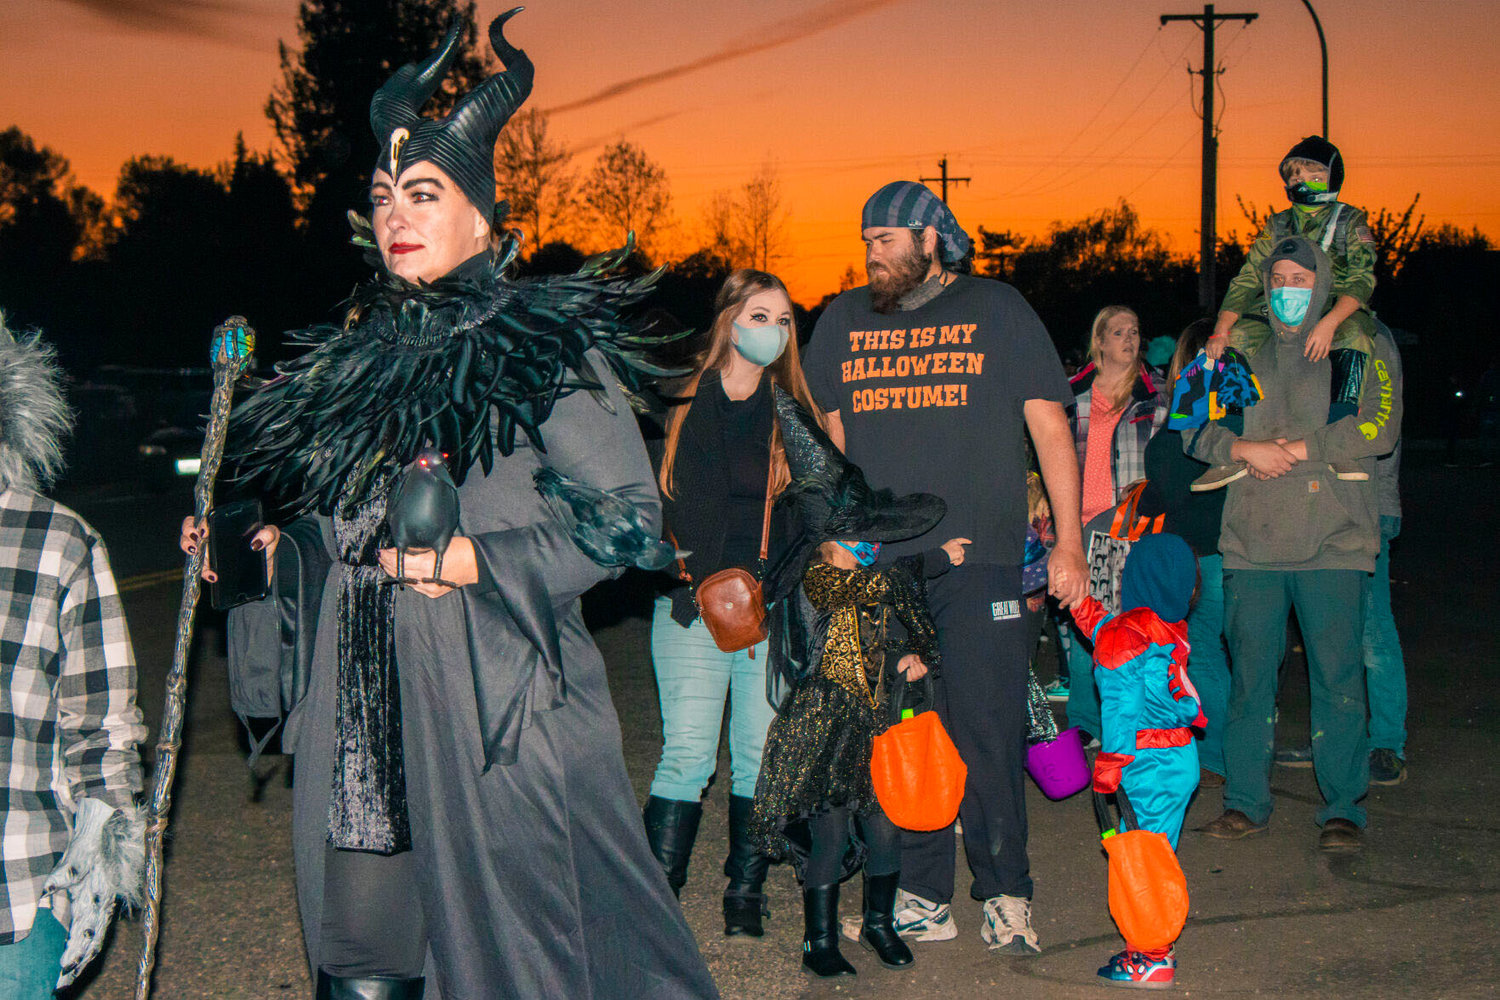 Community members decked out in Halloween attire wait in line for a trunk-or-treat event at the Veterans Memorial Museum on Halloween 2020.